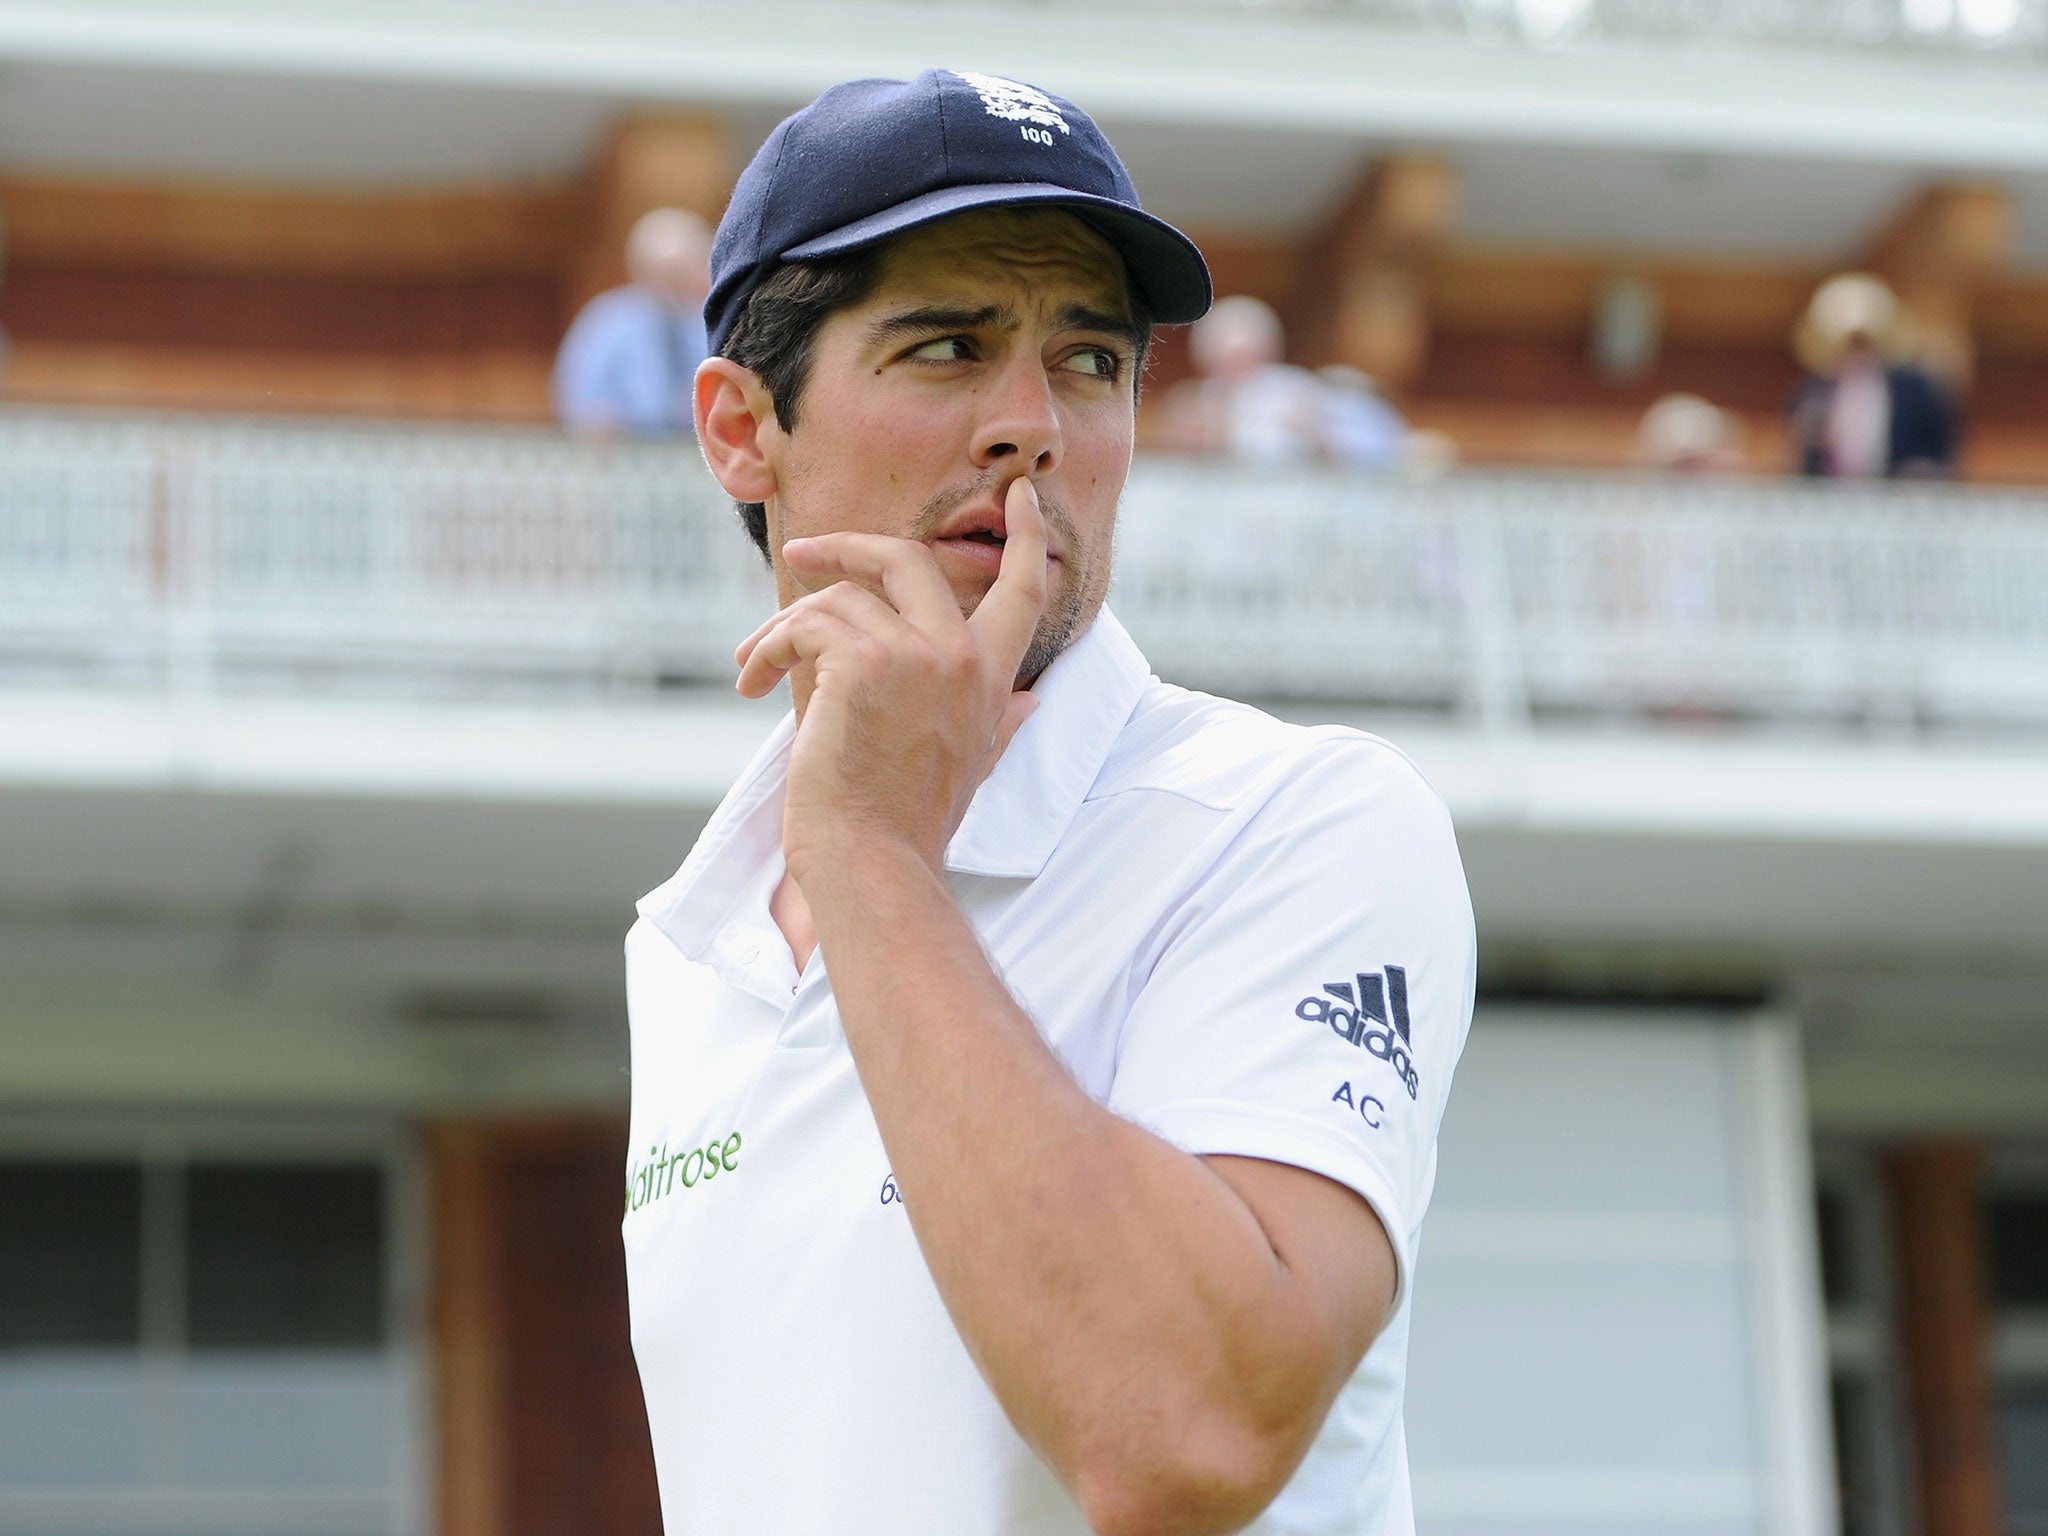 Cook has previously shrugged off criticism from Pietersen